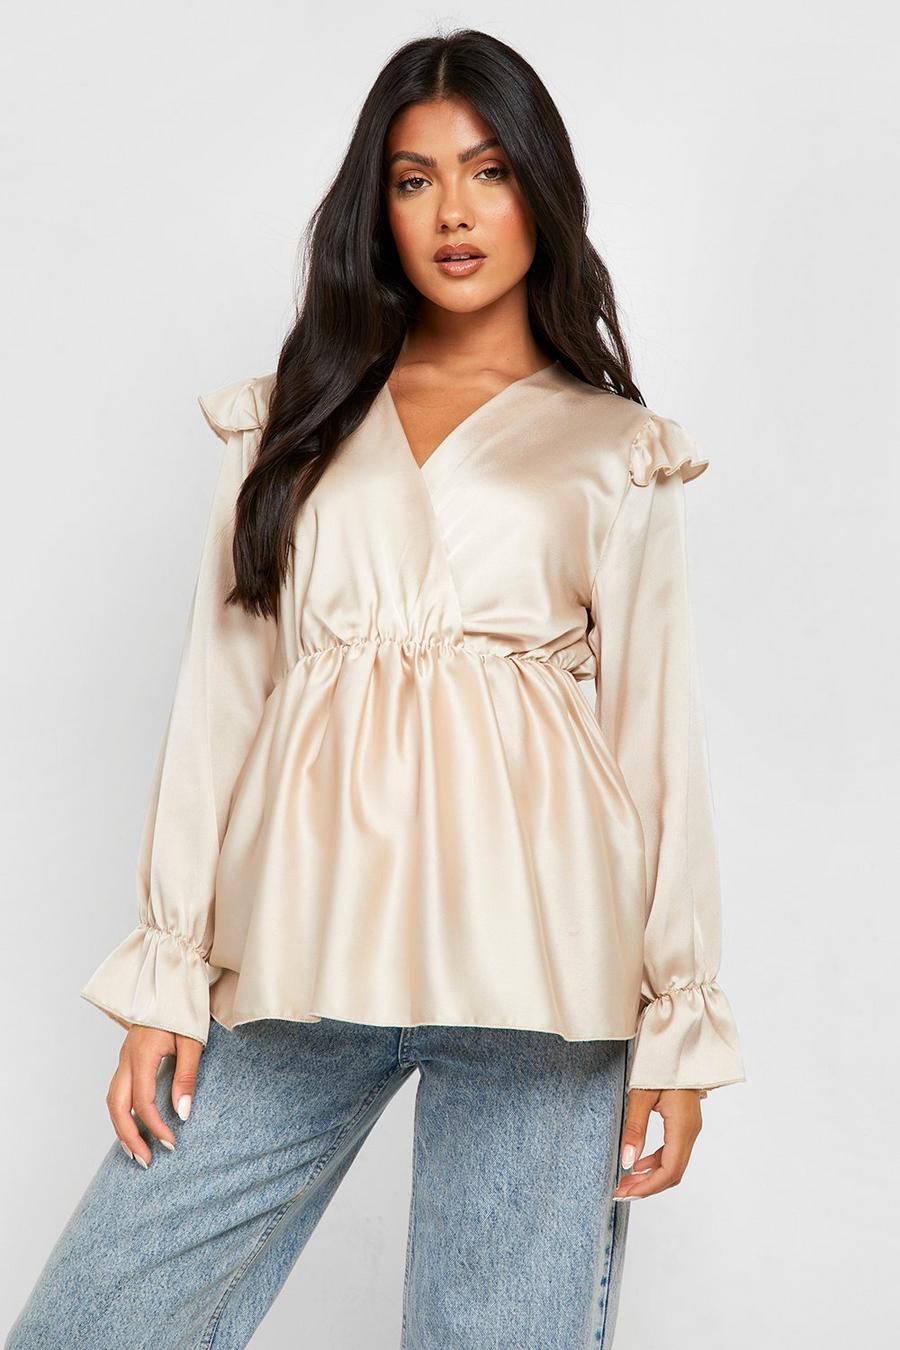 Champagne beis Maternity Satin Ruffle Wrap Top